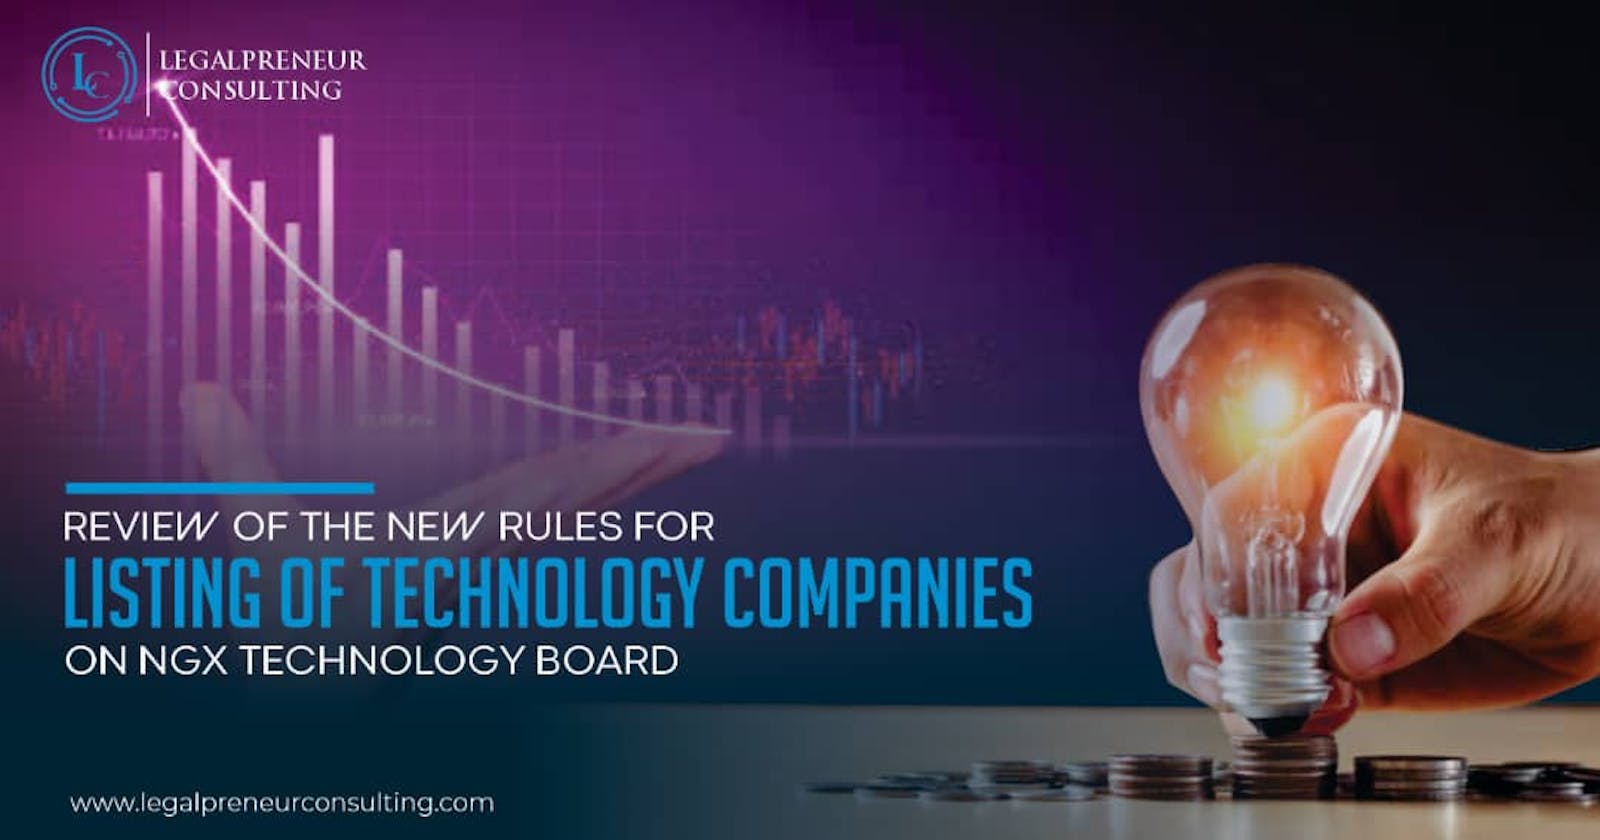 Rules For Listing Of Technology Companies On The Nigerian Exchange Limited (NGX) Technology Board